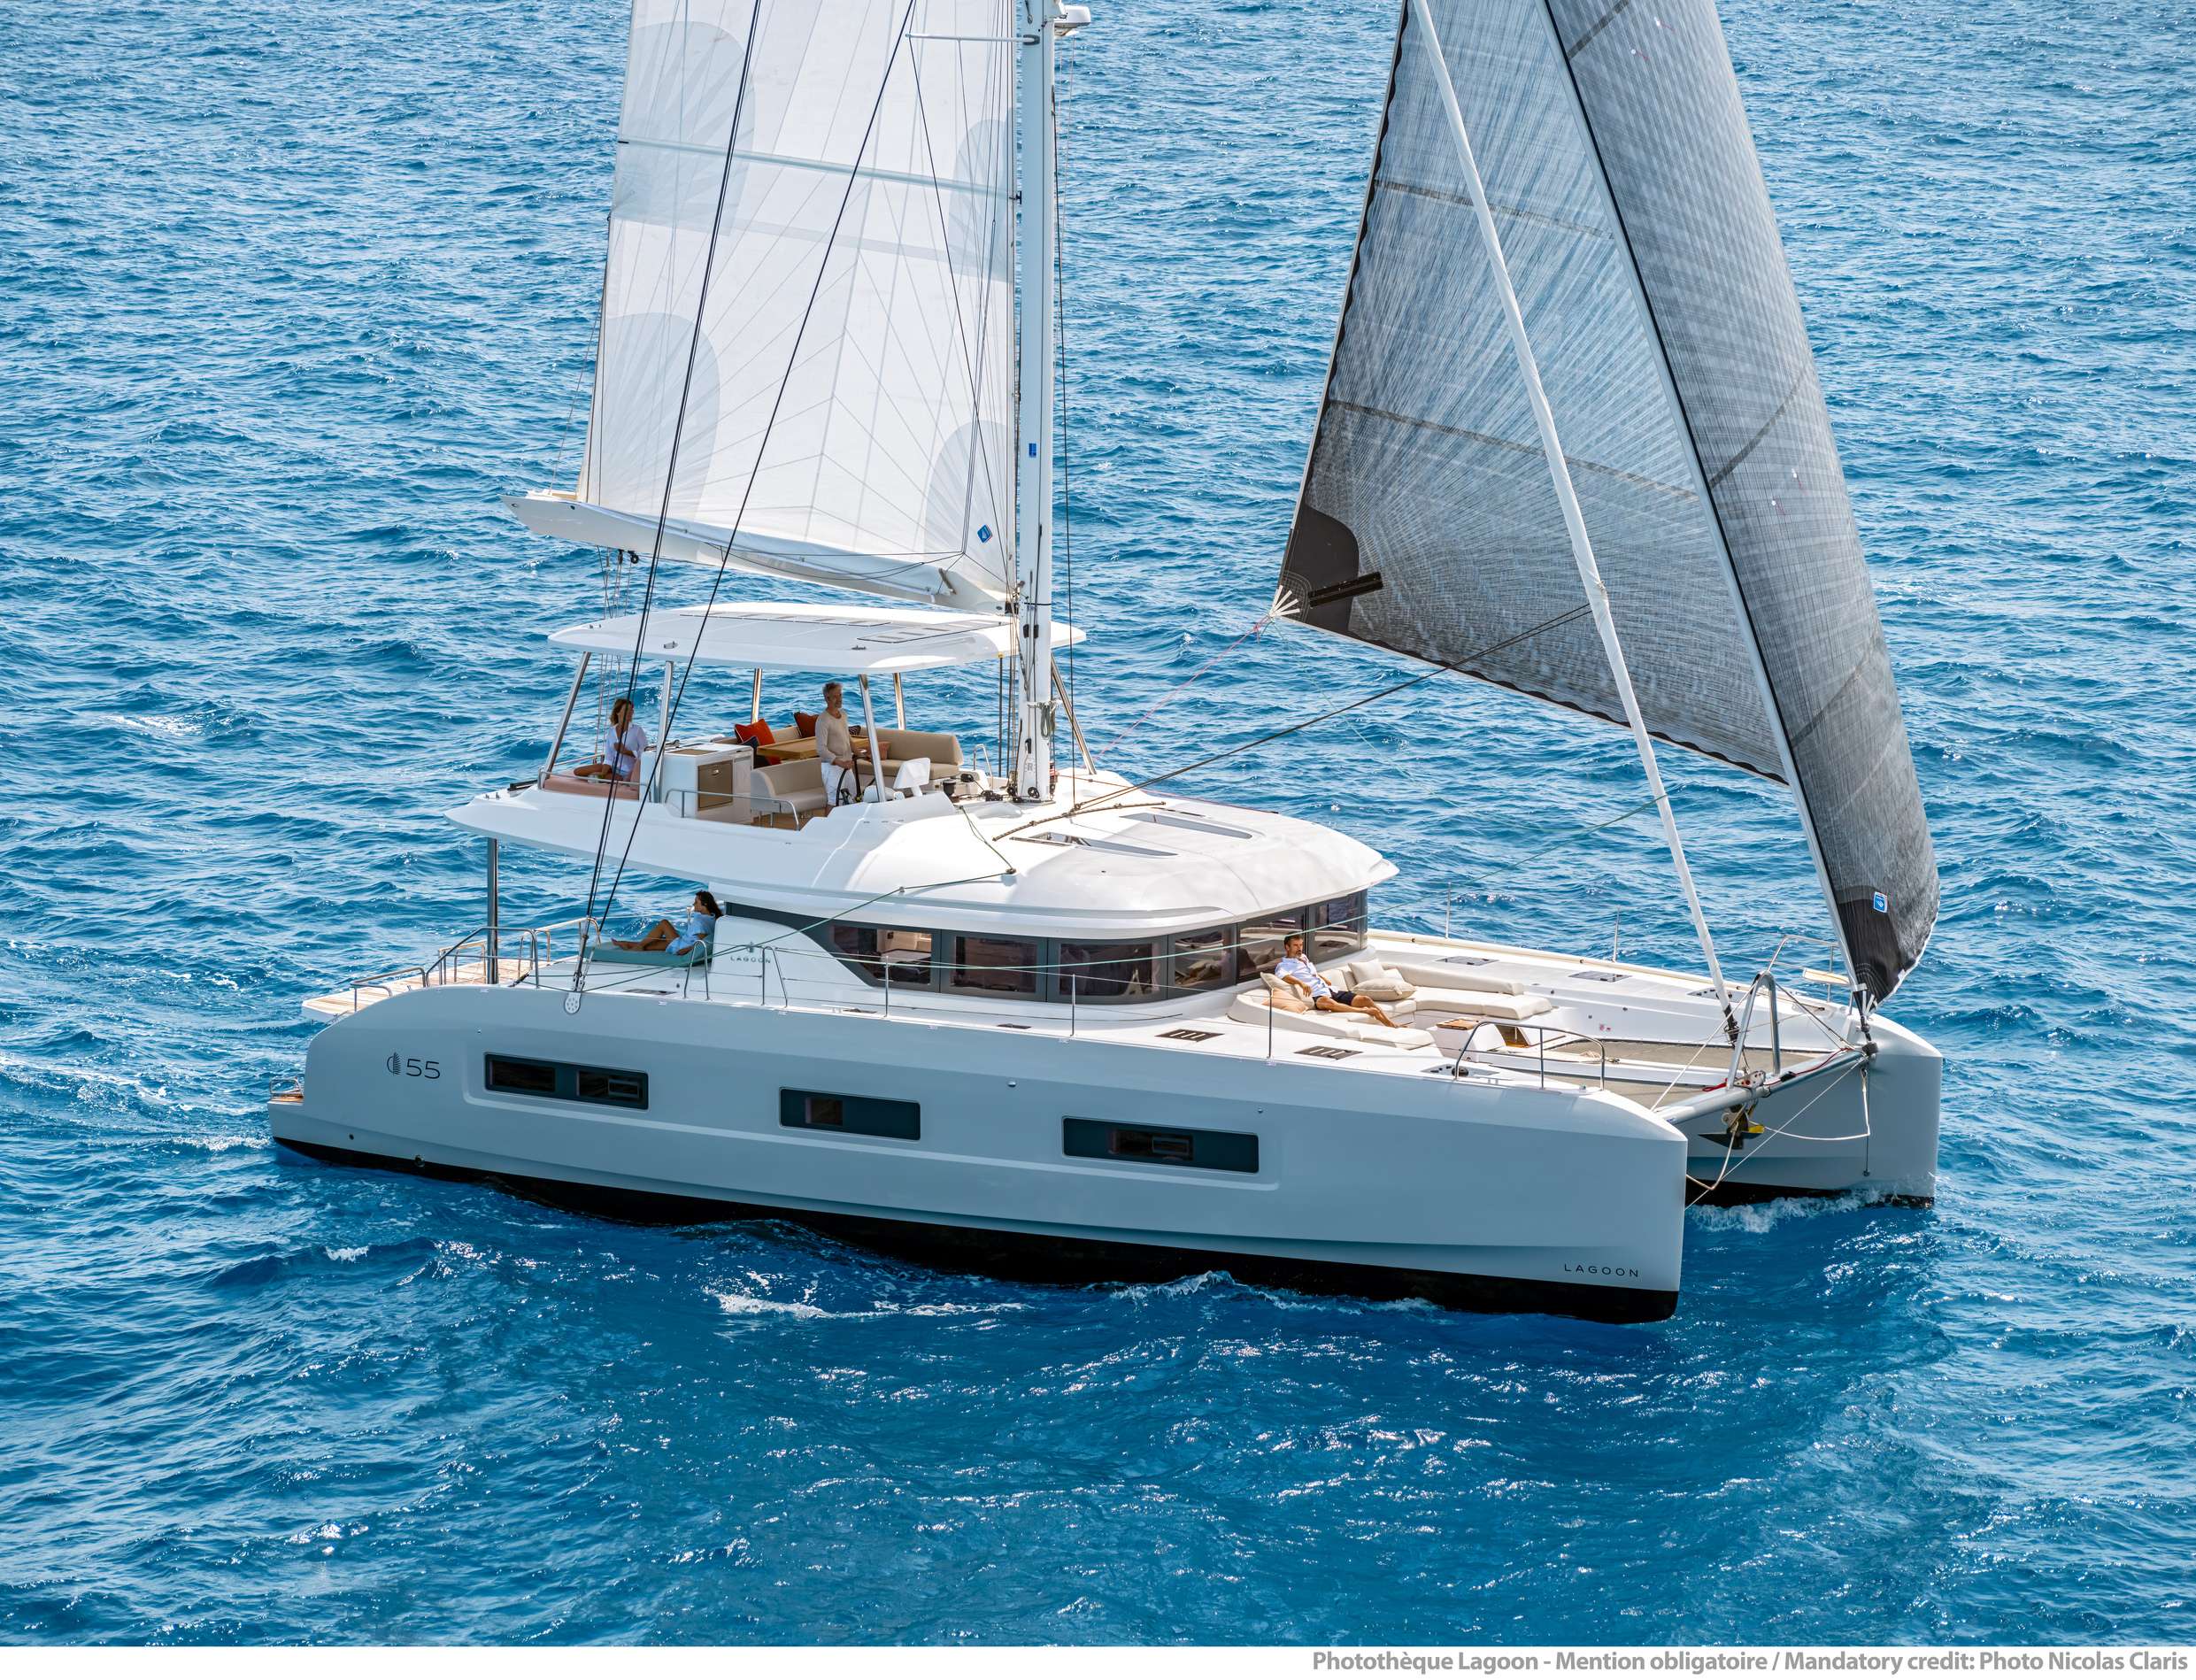 VALIUM 55 - Yacht Charter Palairos & Boat hire in Greece 1